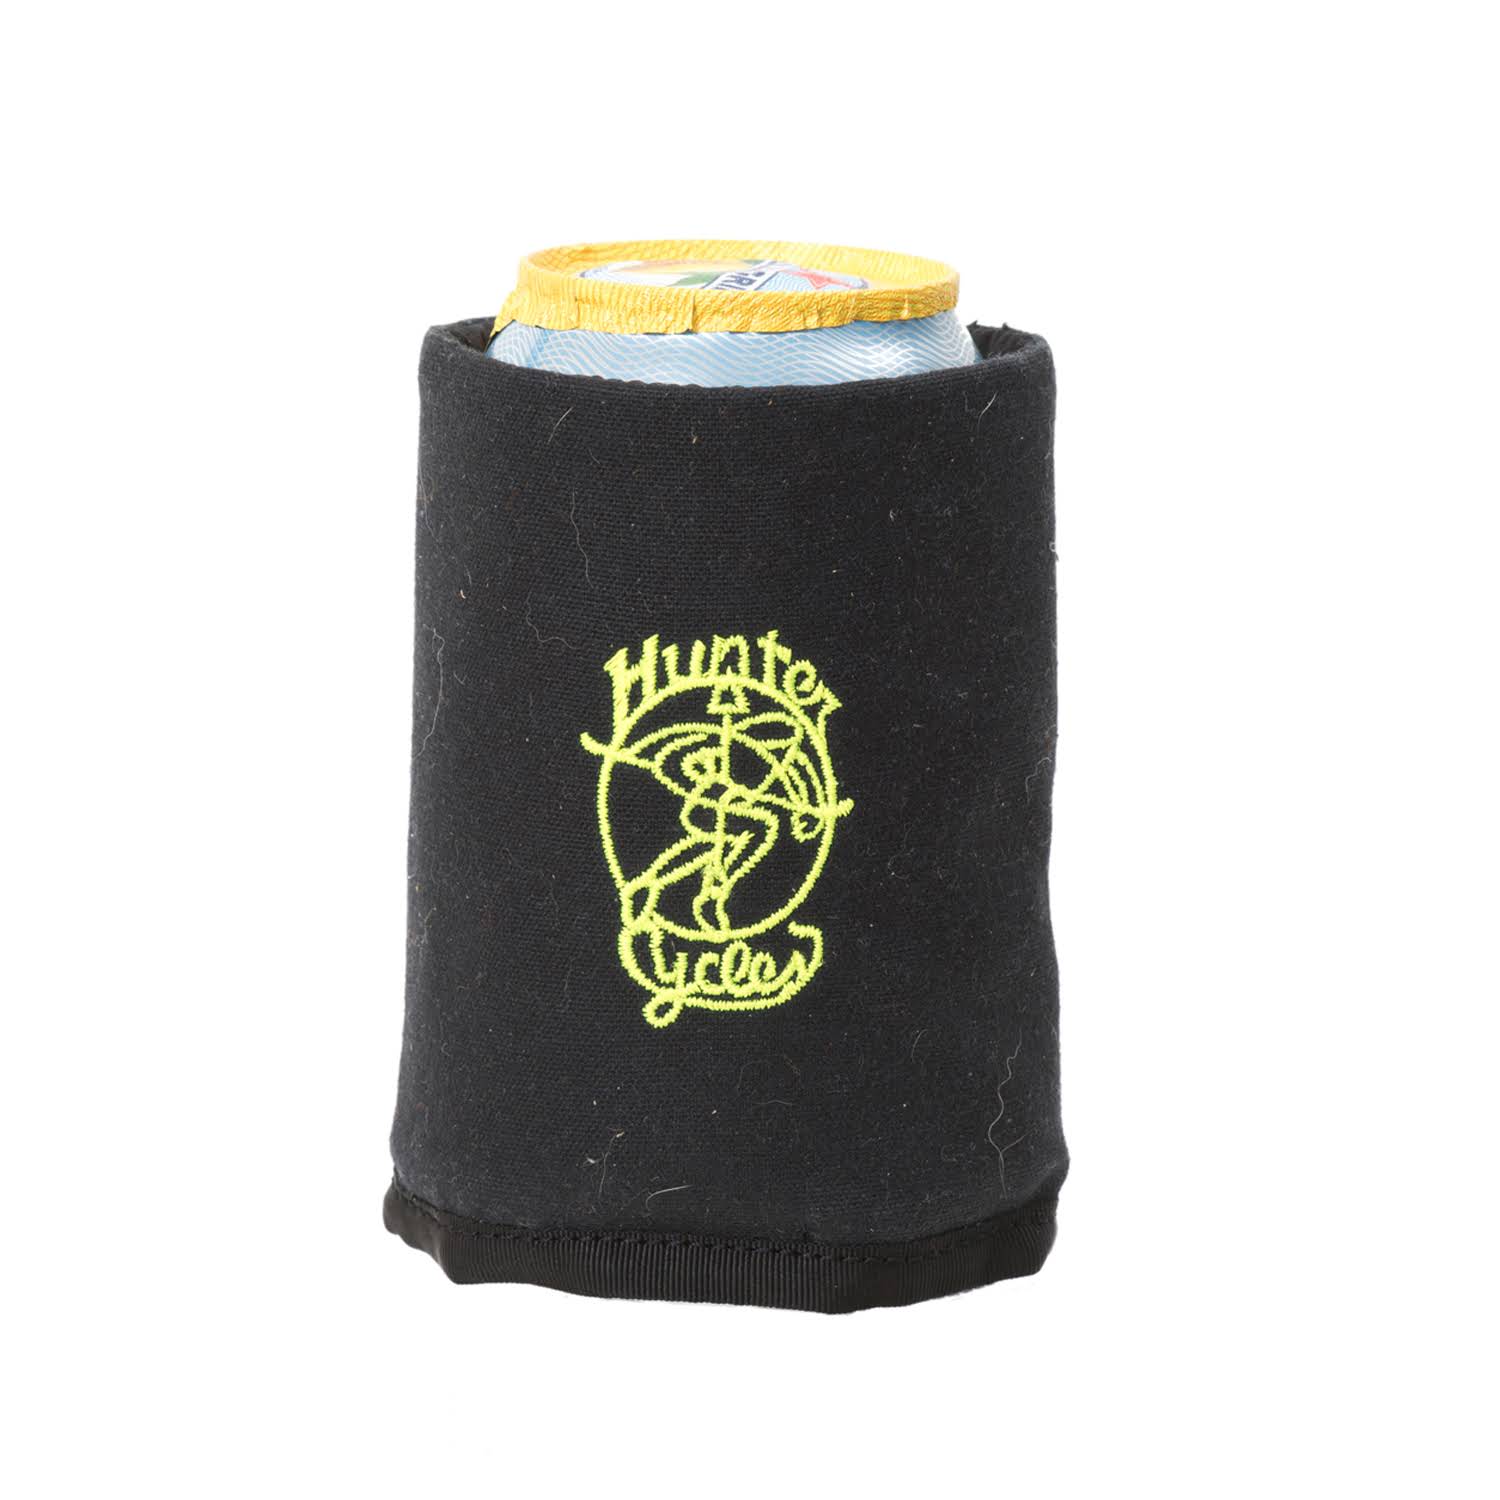 HUNTER CYCLES Coozies